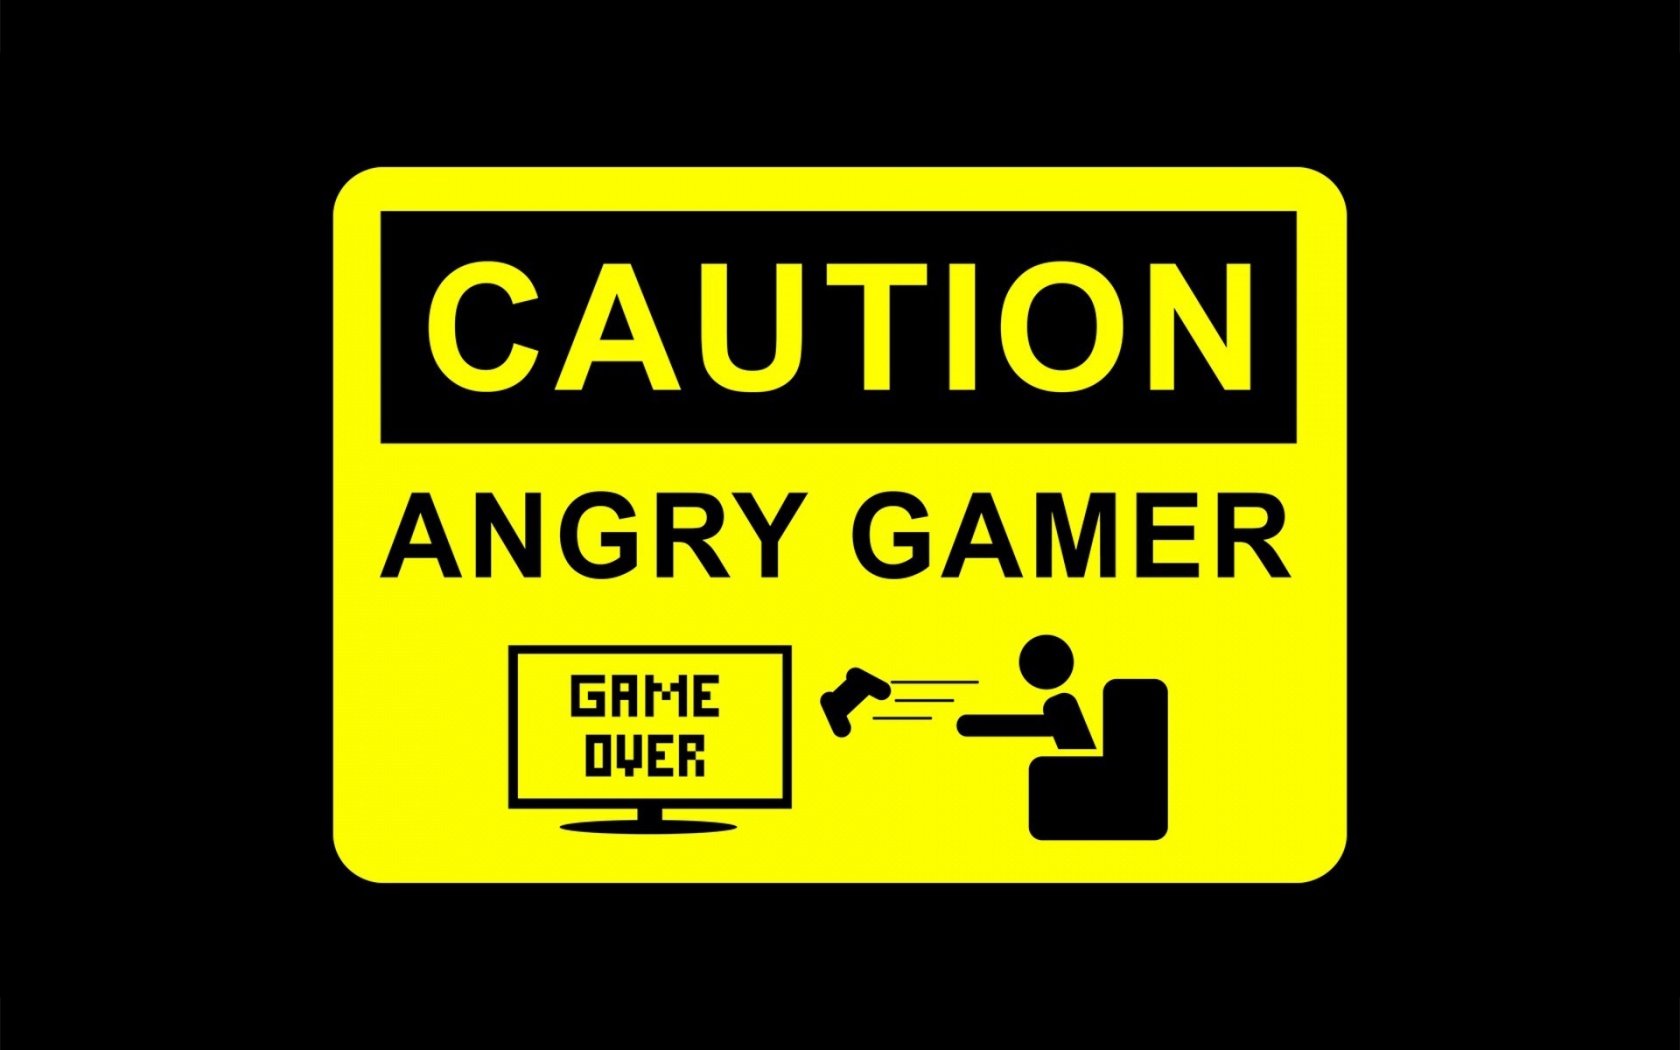 Caution angry gamer Wallpaper in 1680x1050 Widescreen